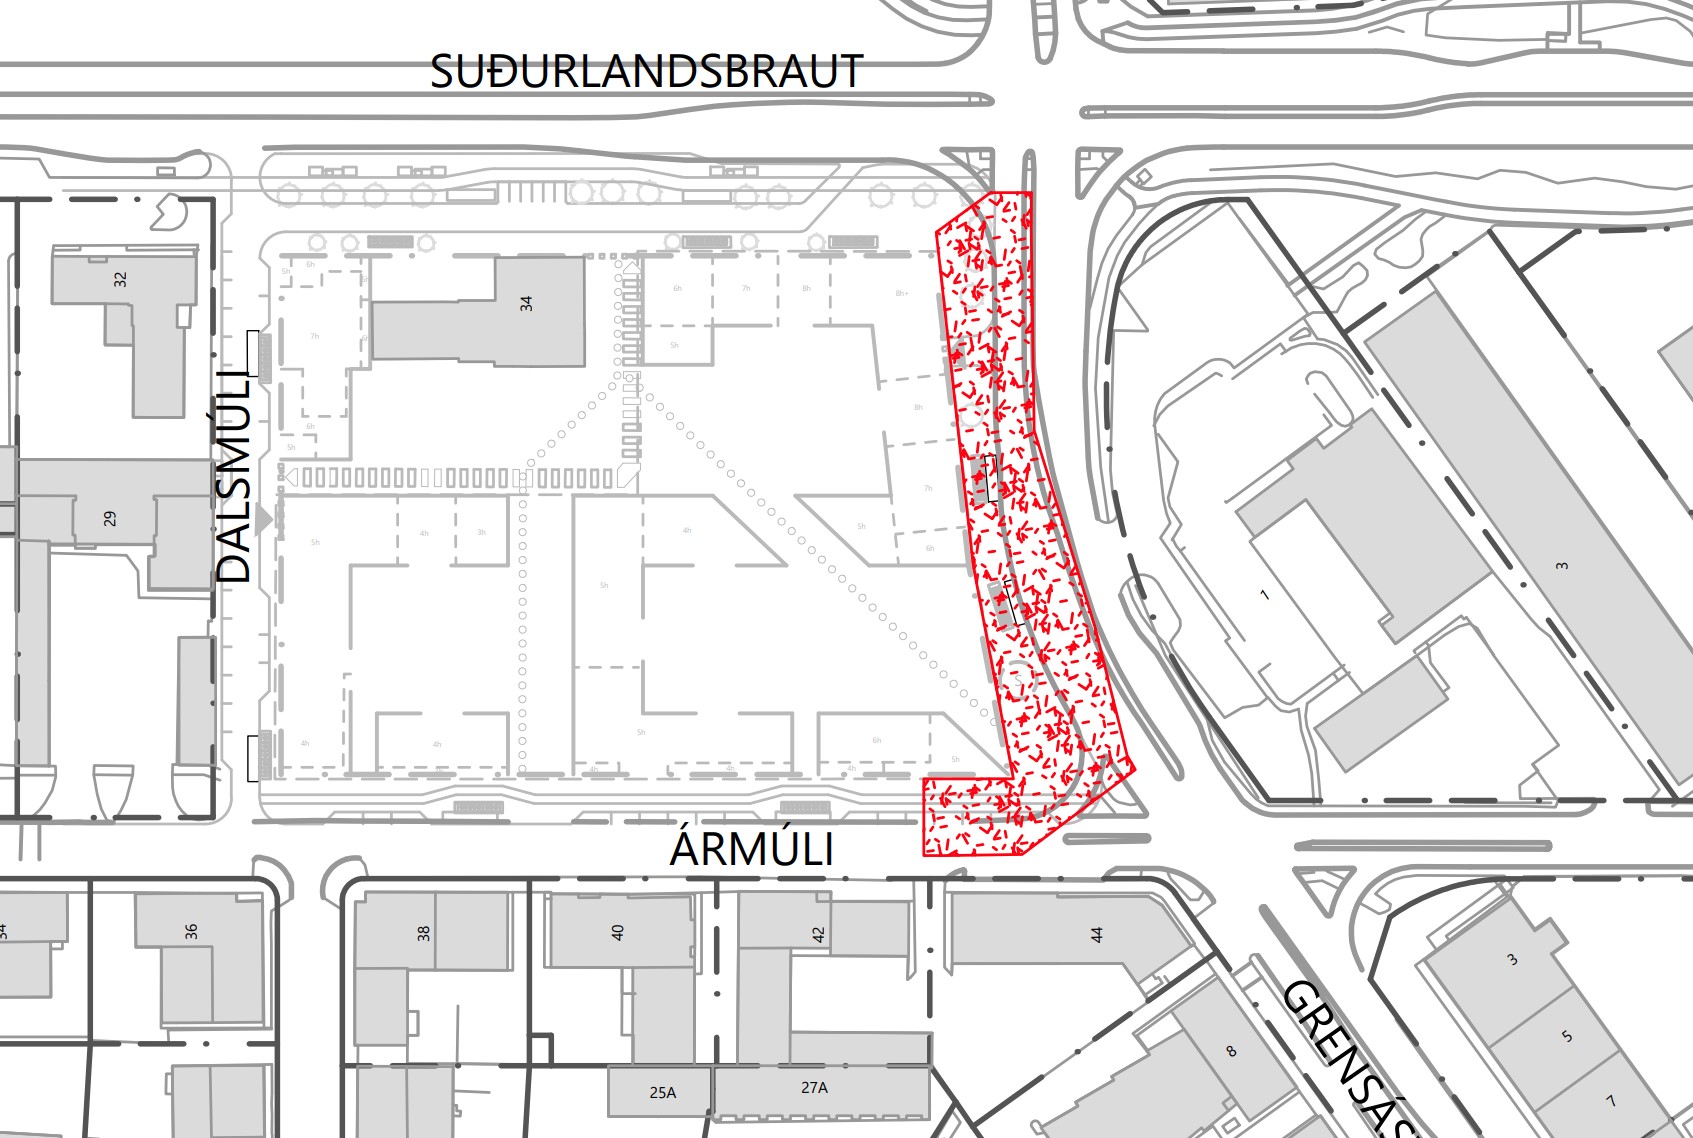 Closure of part of Grensásvegur street for four months